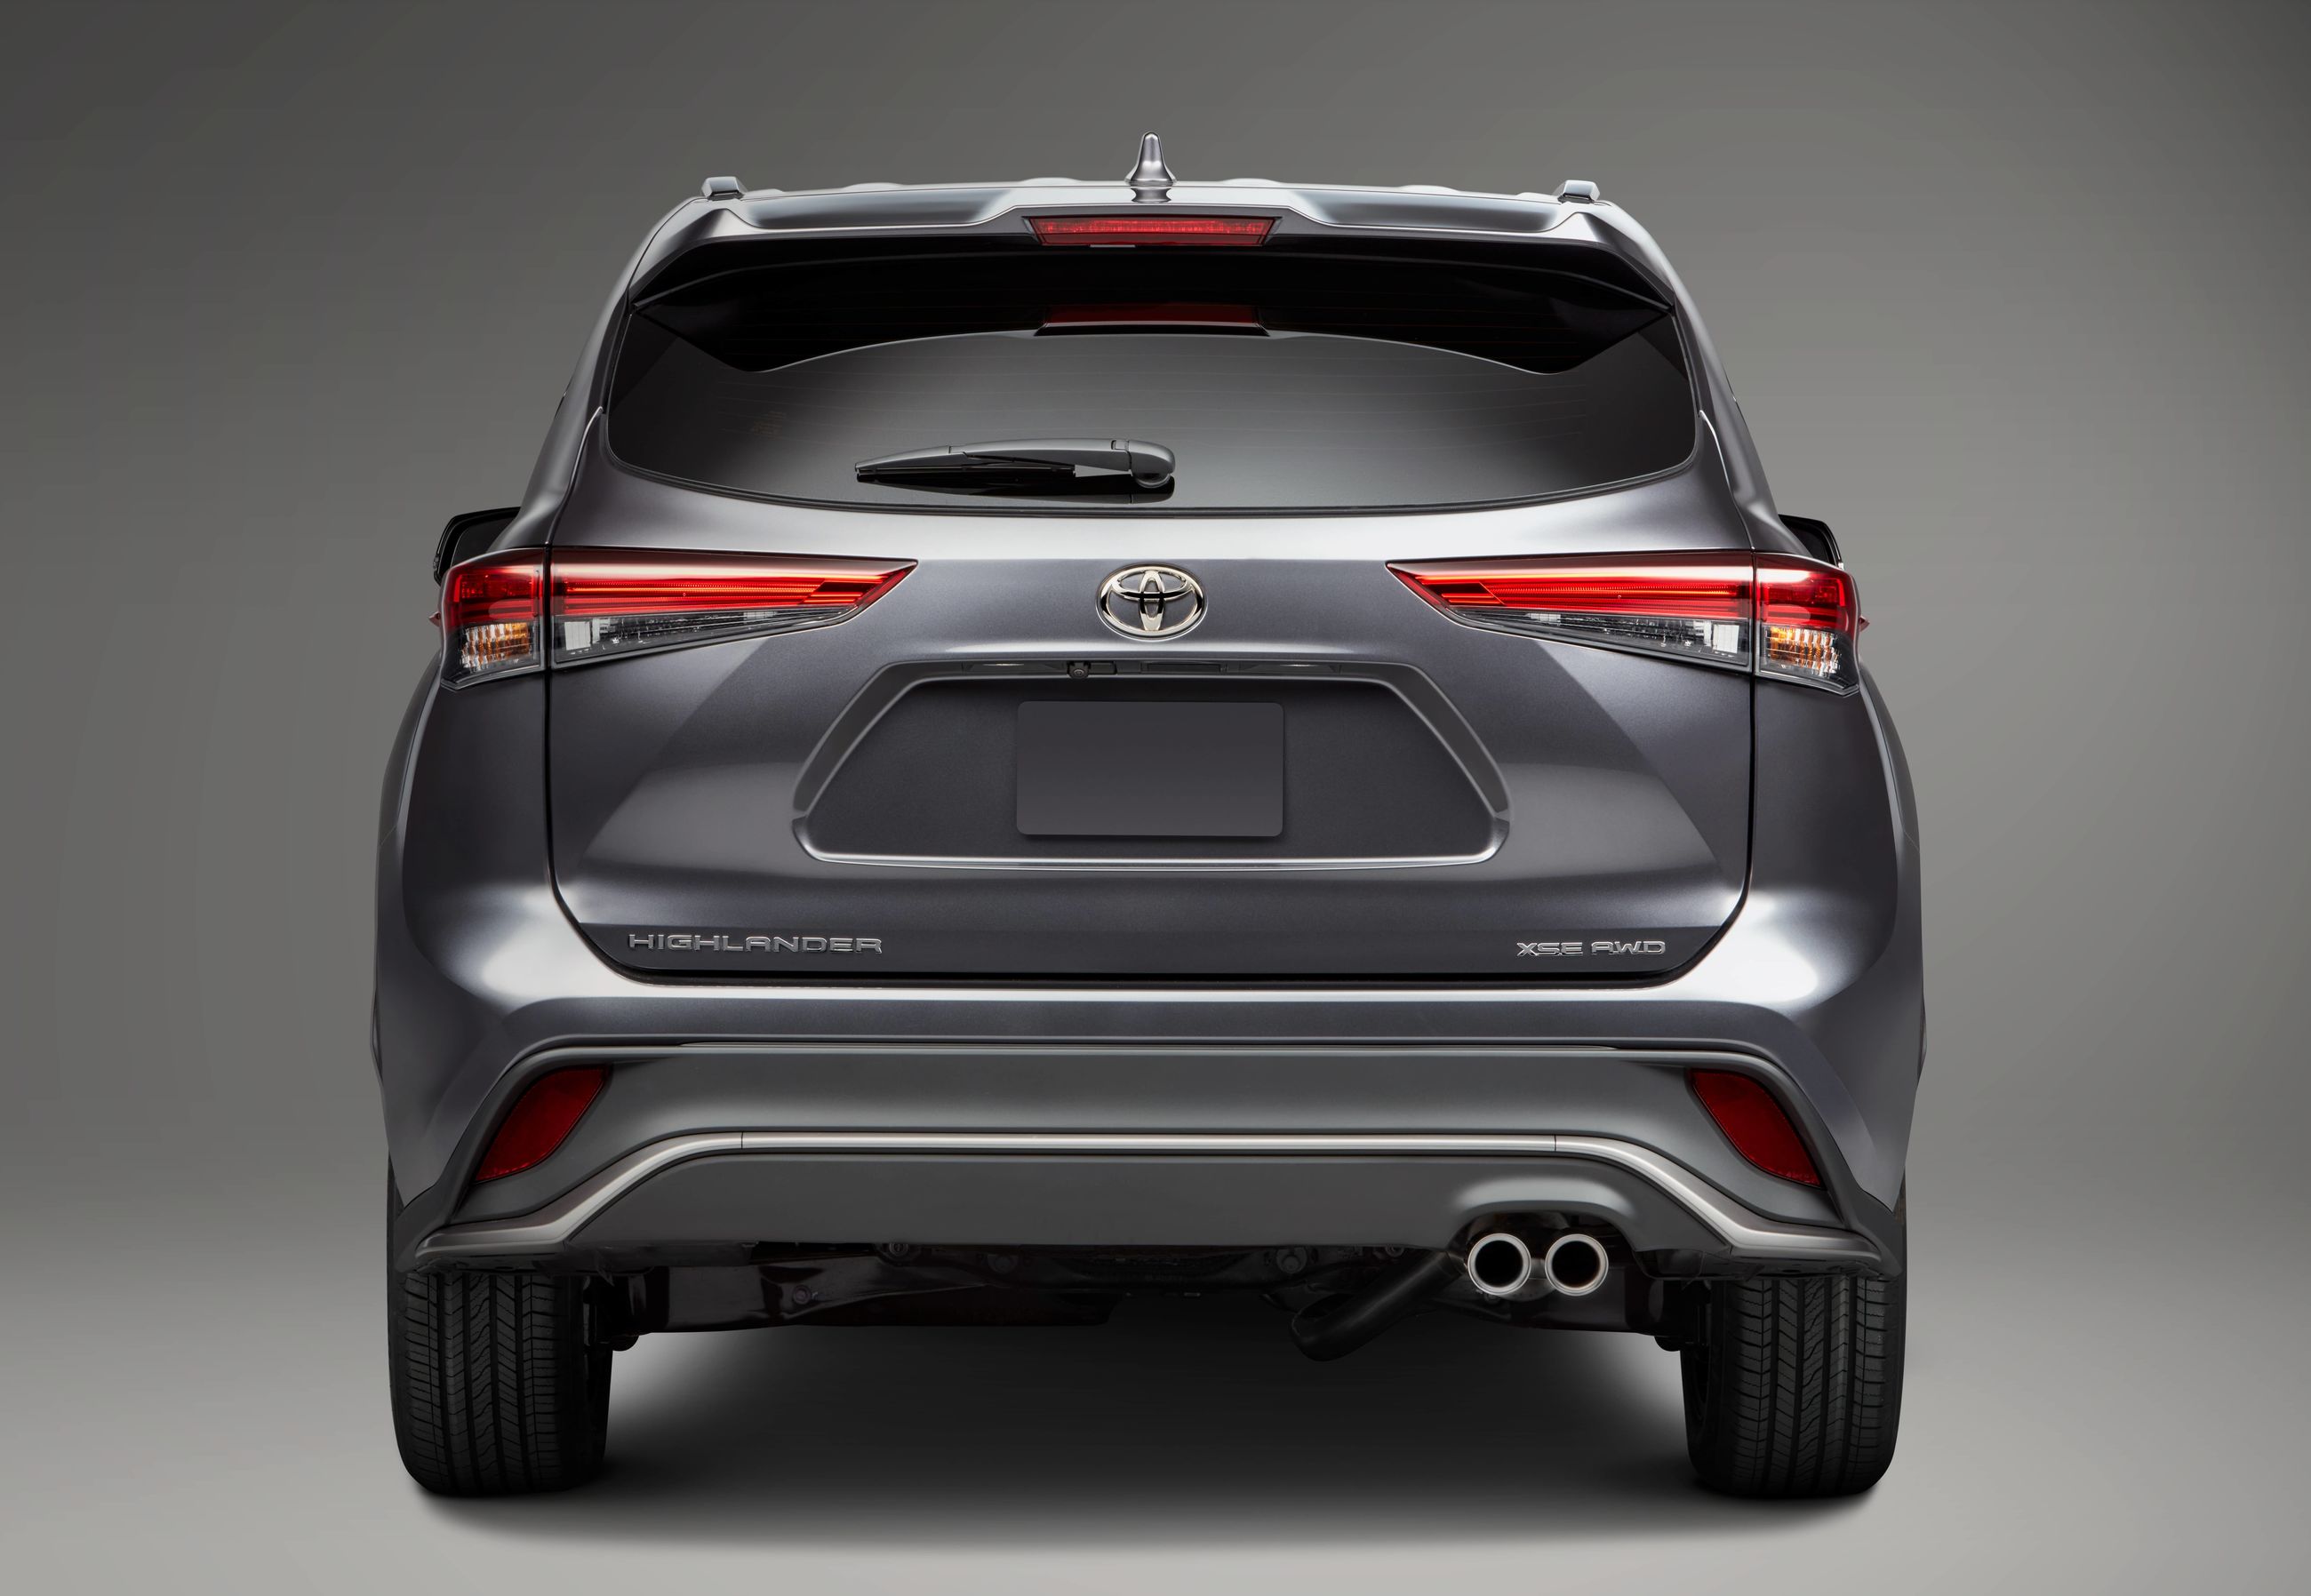 Rear of the 2021 Toyota Highlander XSE